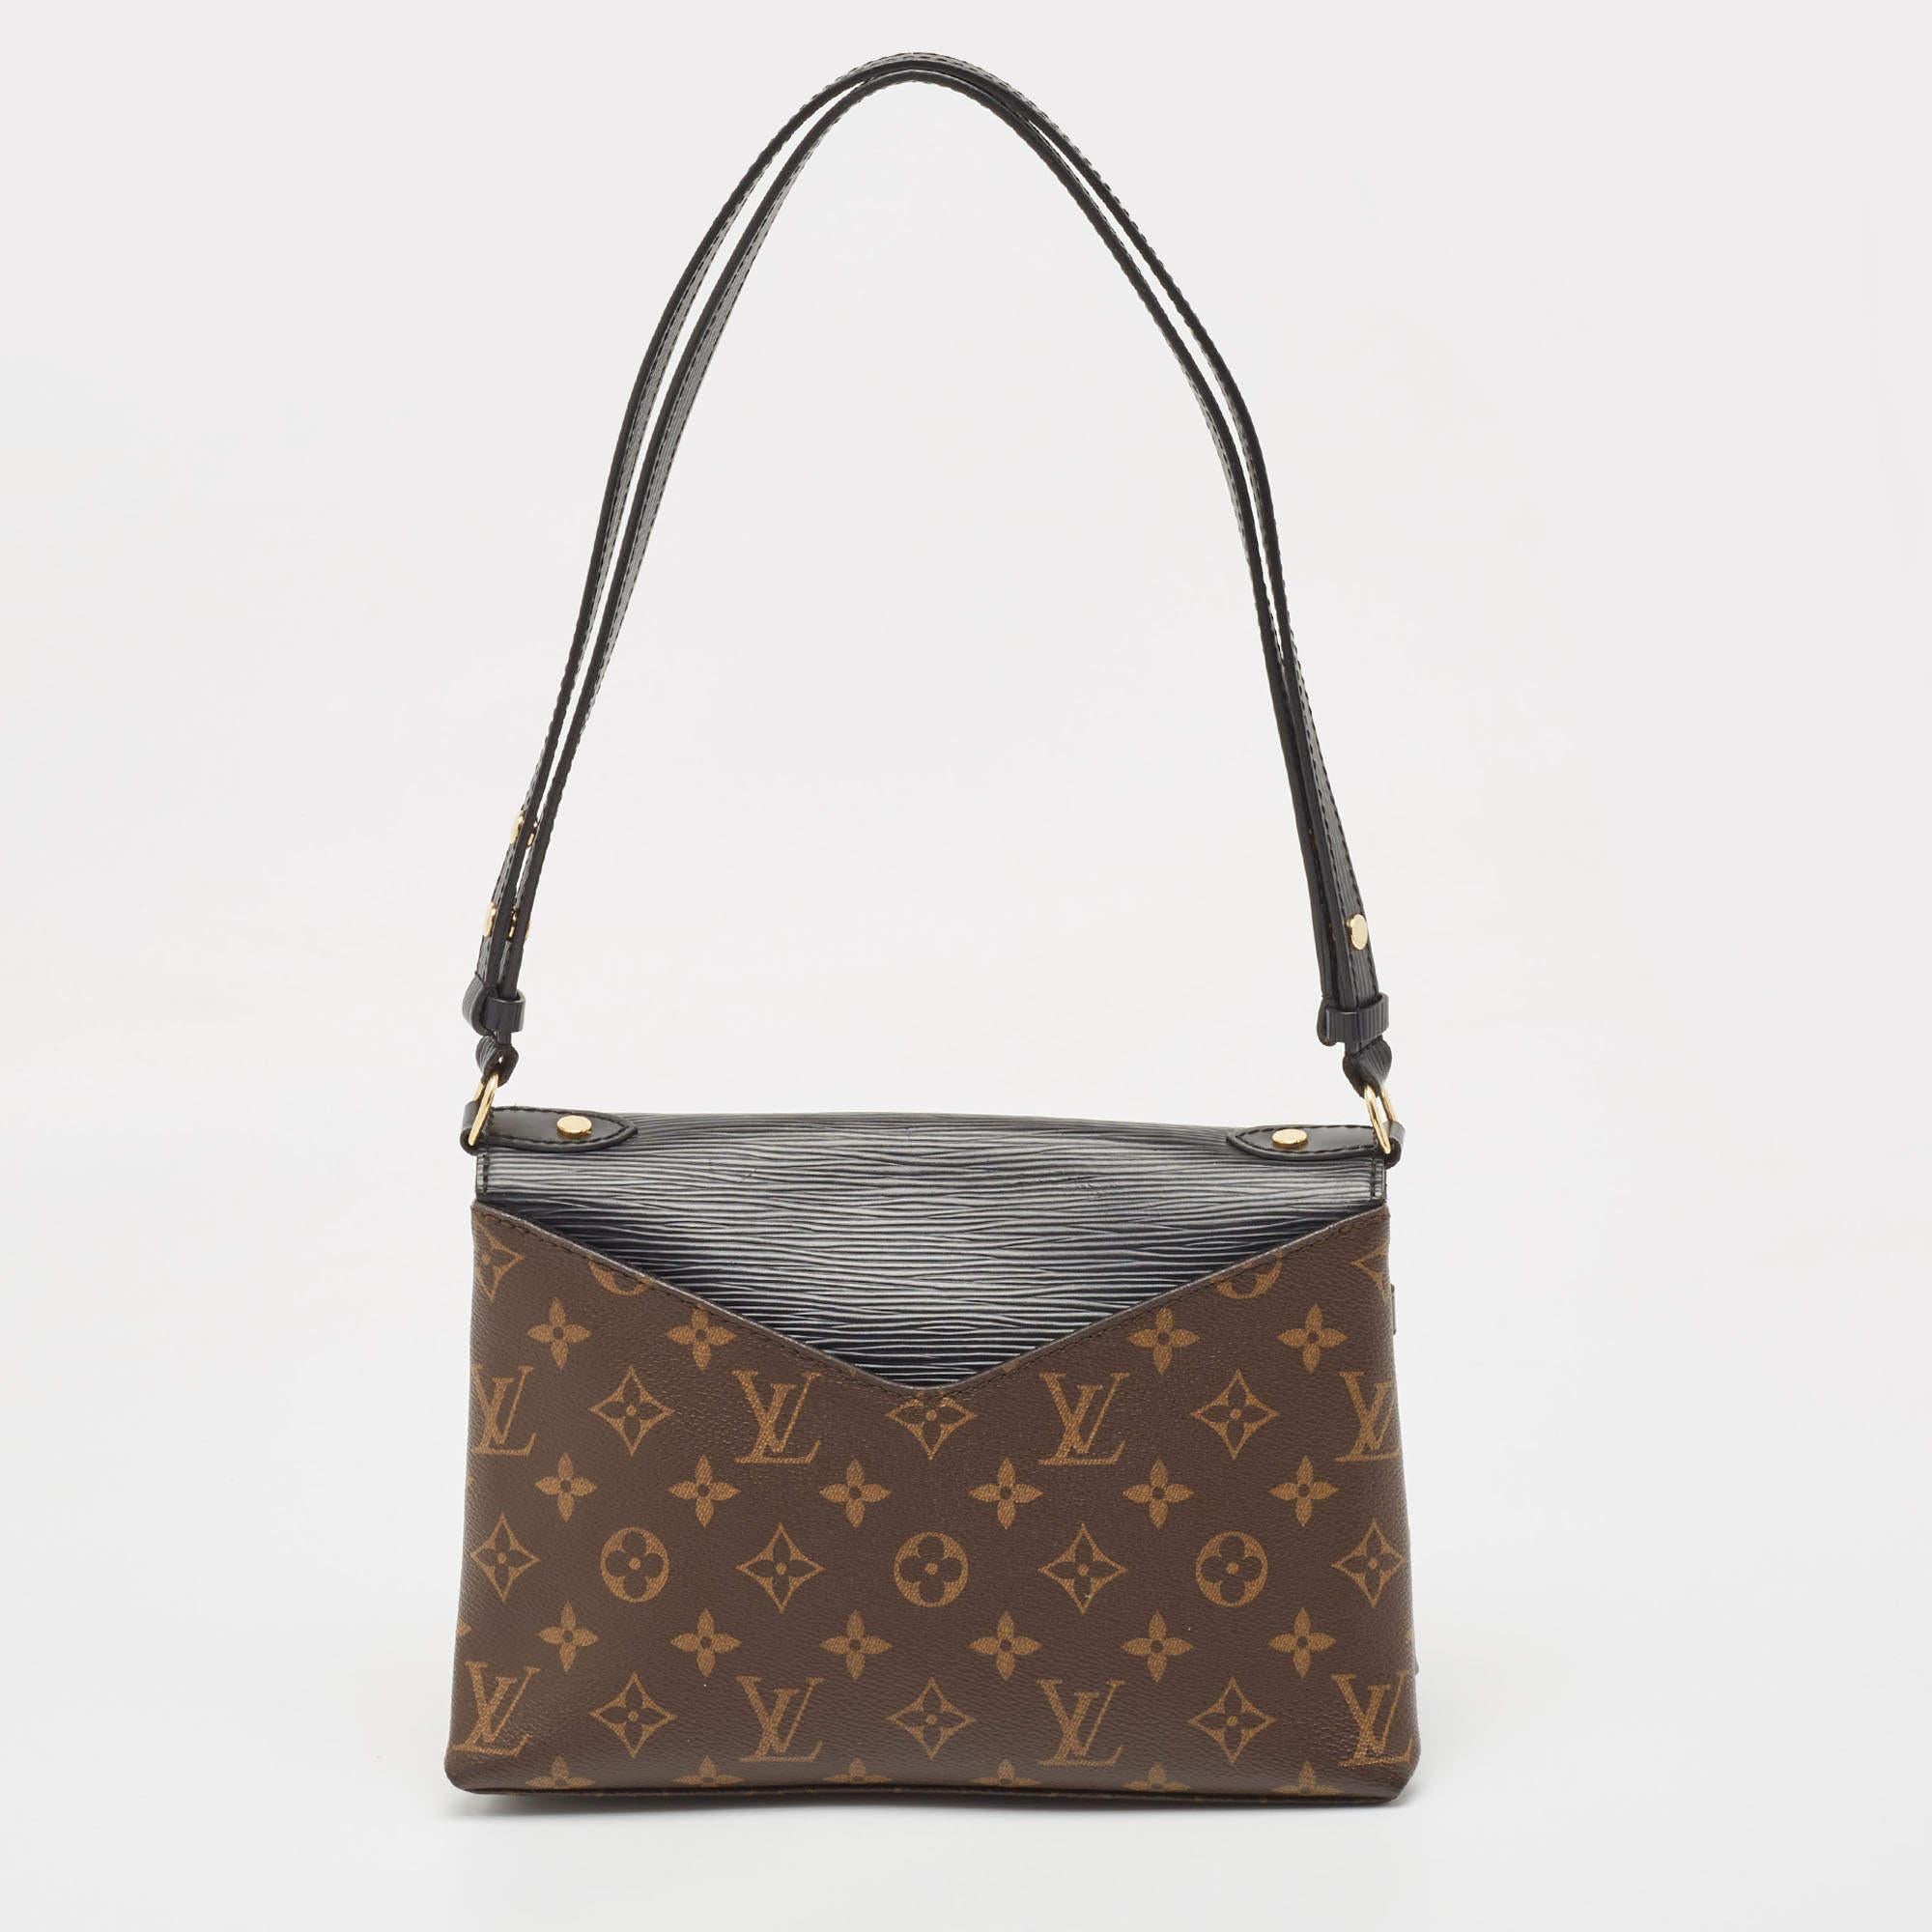 This Louis Vuitton bag is an example of the brand's fine designs that are skillfully crafted to project a classic charm. It is a functional creation with an elevating appeal.

Includes: Original Dustbag, Info Booklet

